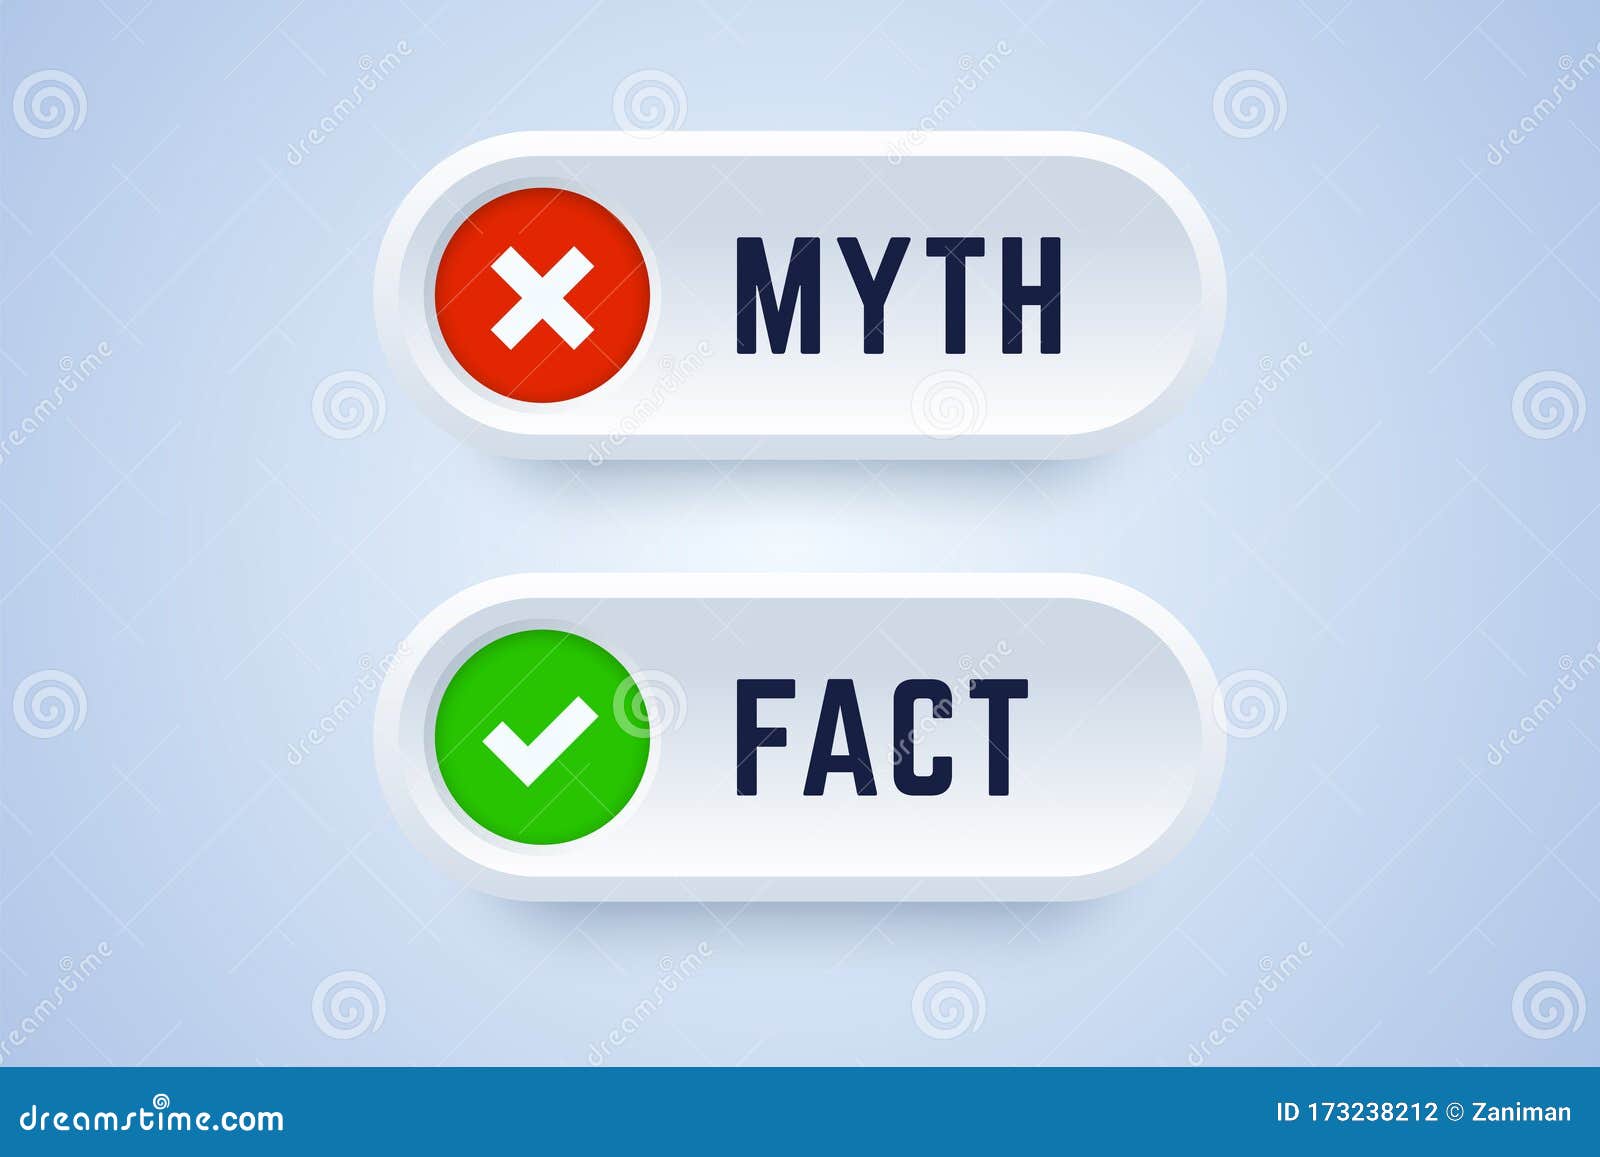 myth and fact buttons in 3d style.  .